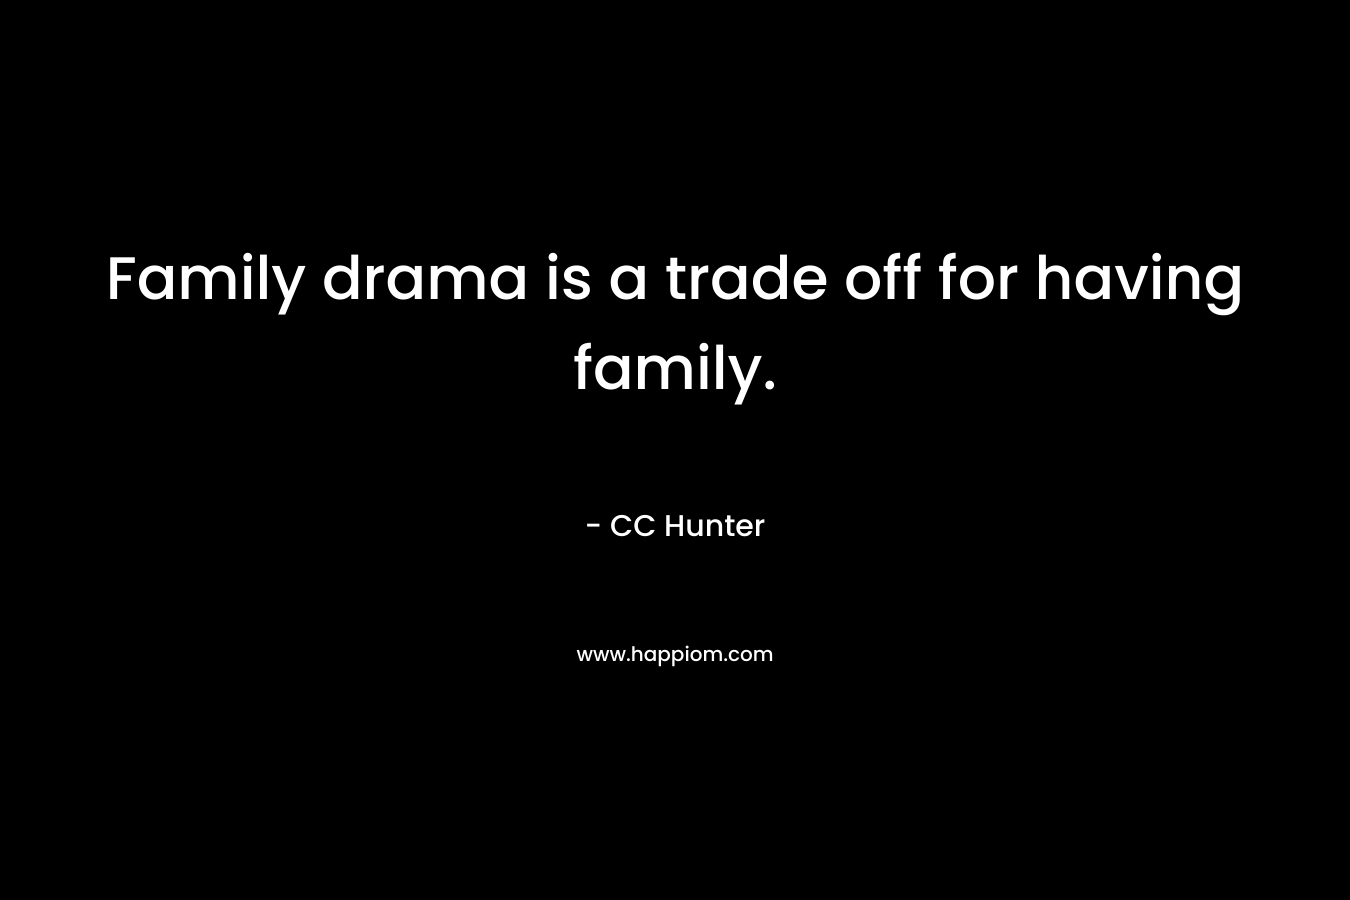 Family drama is a trade off for having family. – CC Hunter